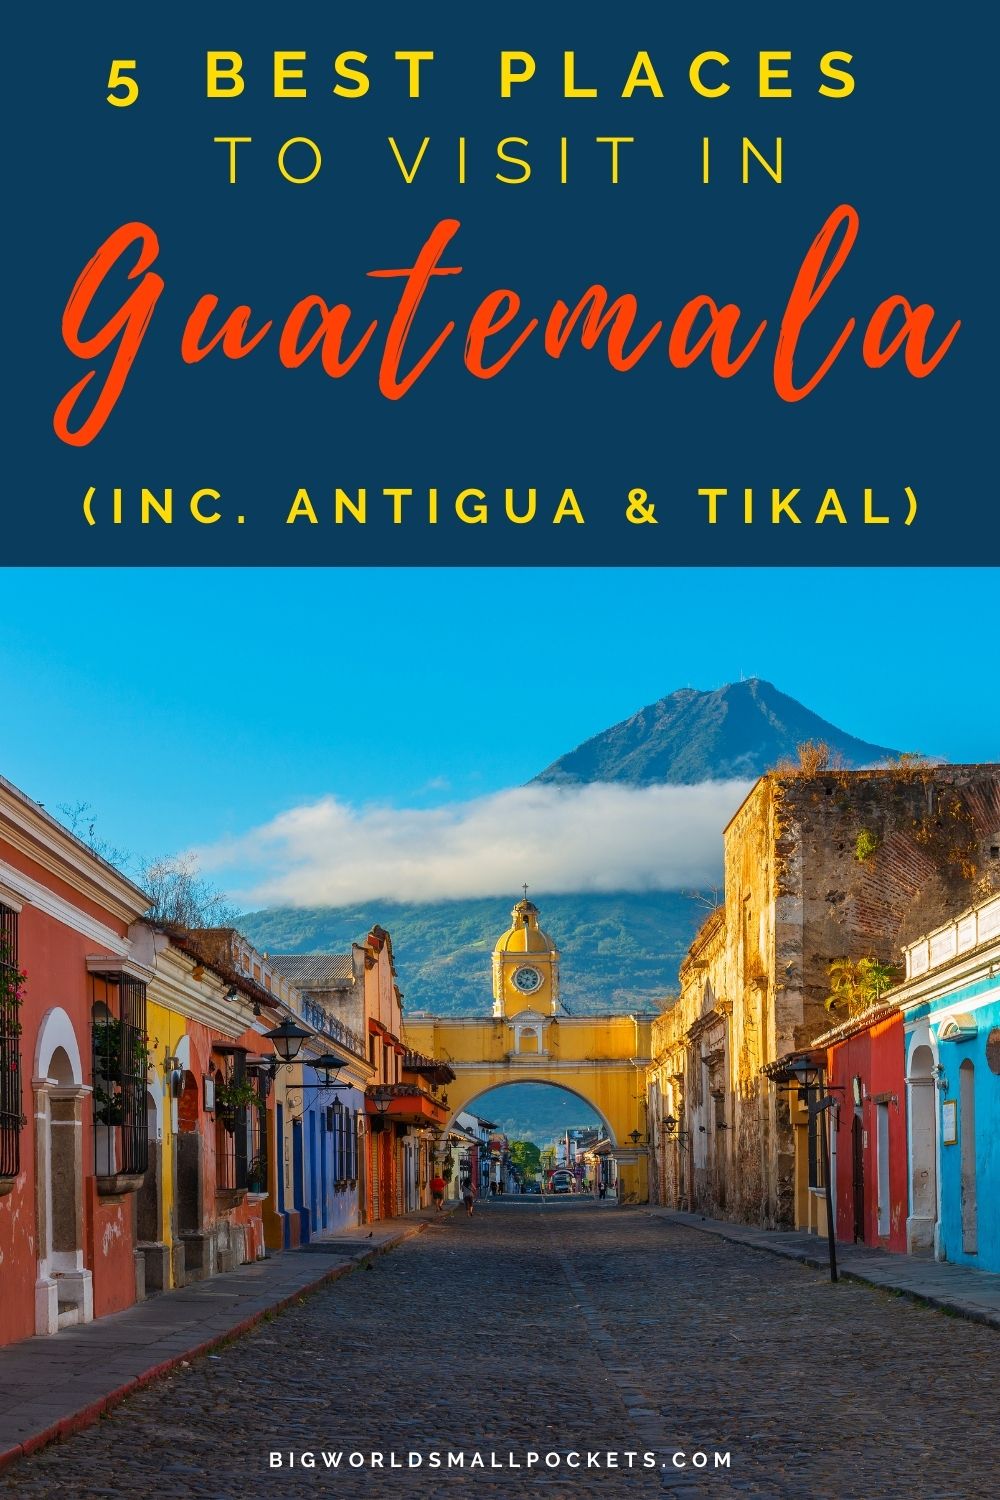 5 Best Places to Visit in Guatemala